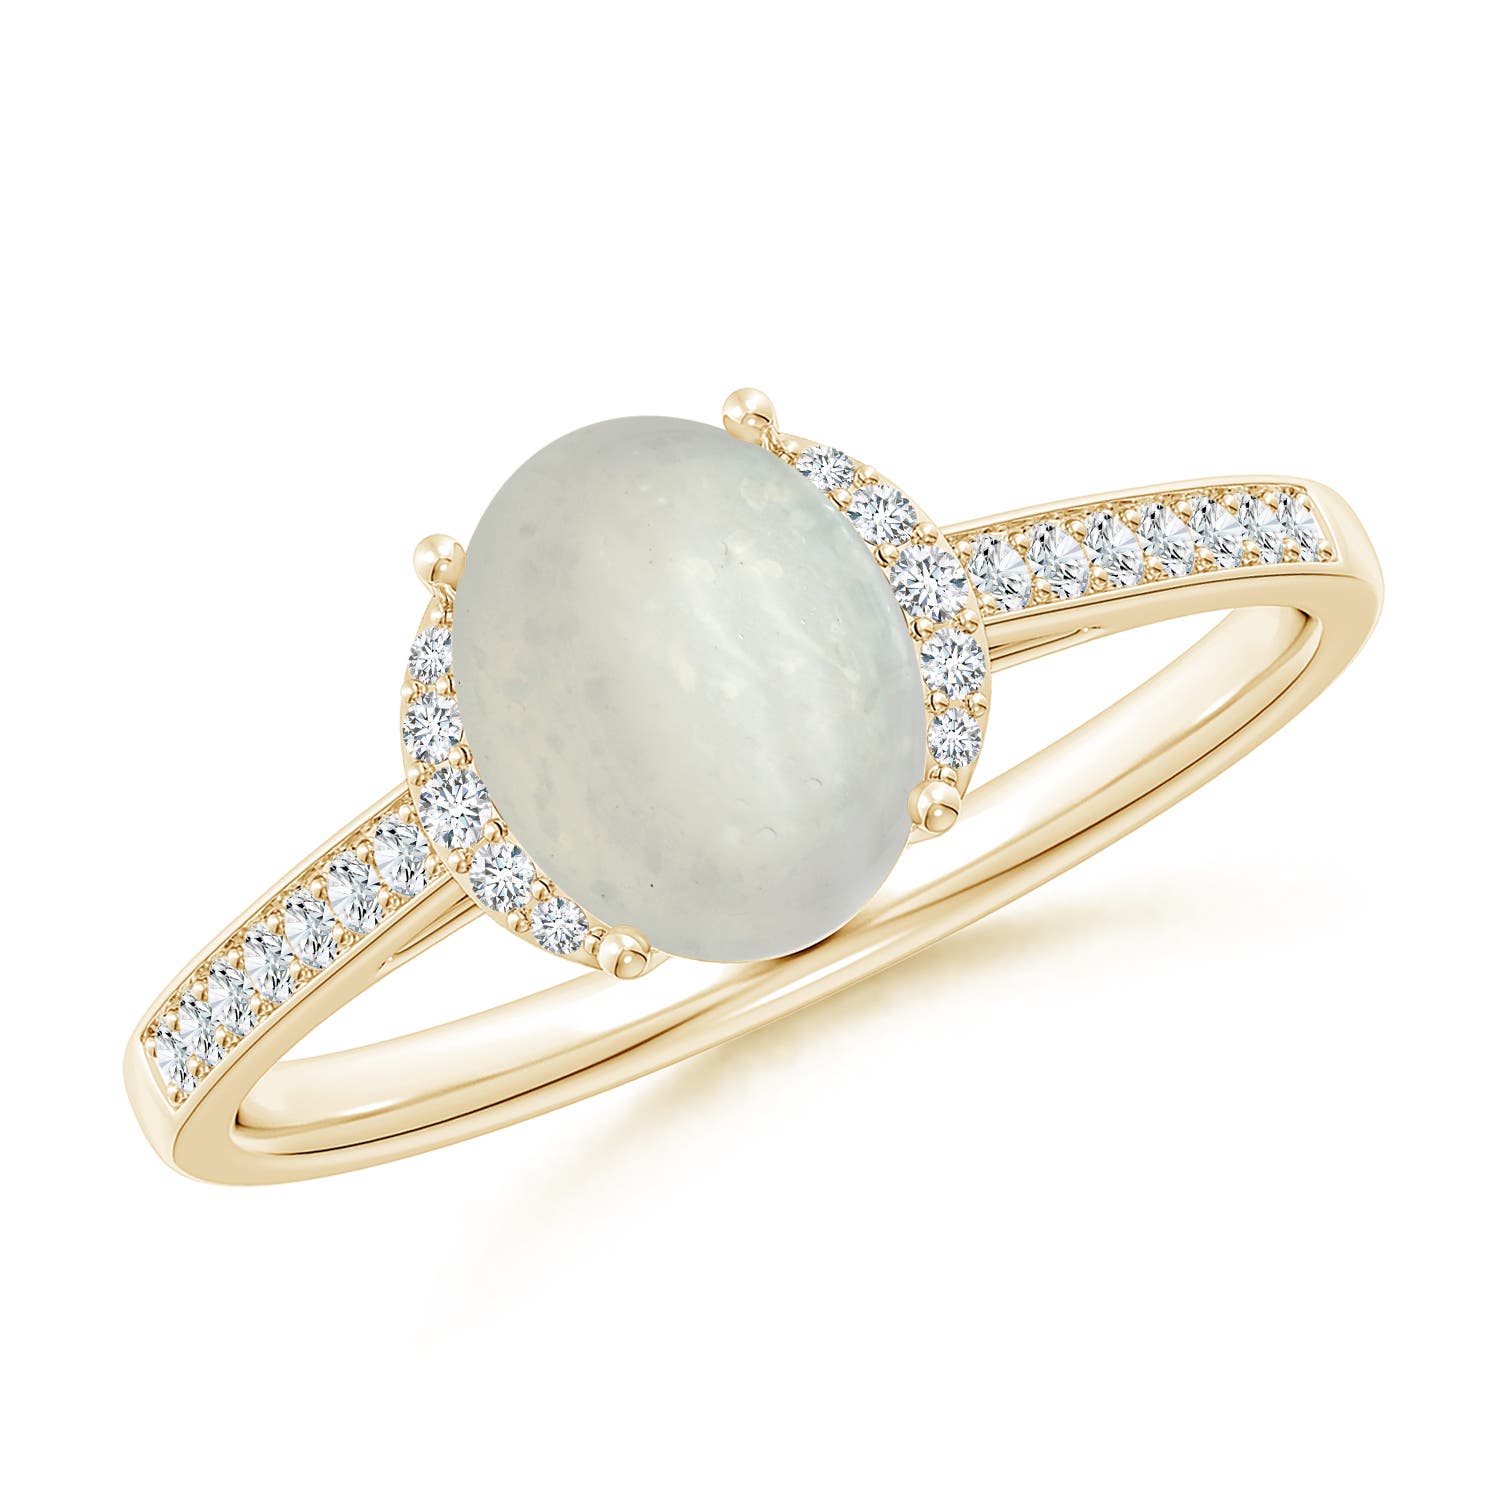 A - Moonstone / 1.23 CT / 14 KT Yellow Gold